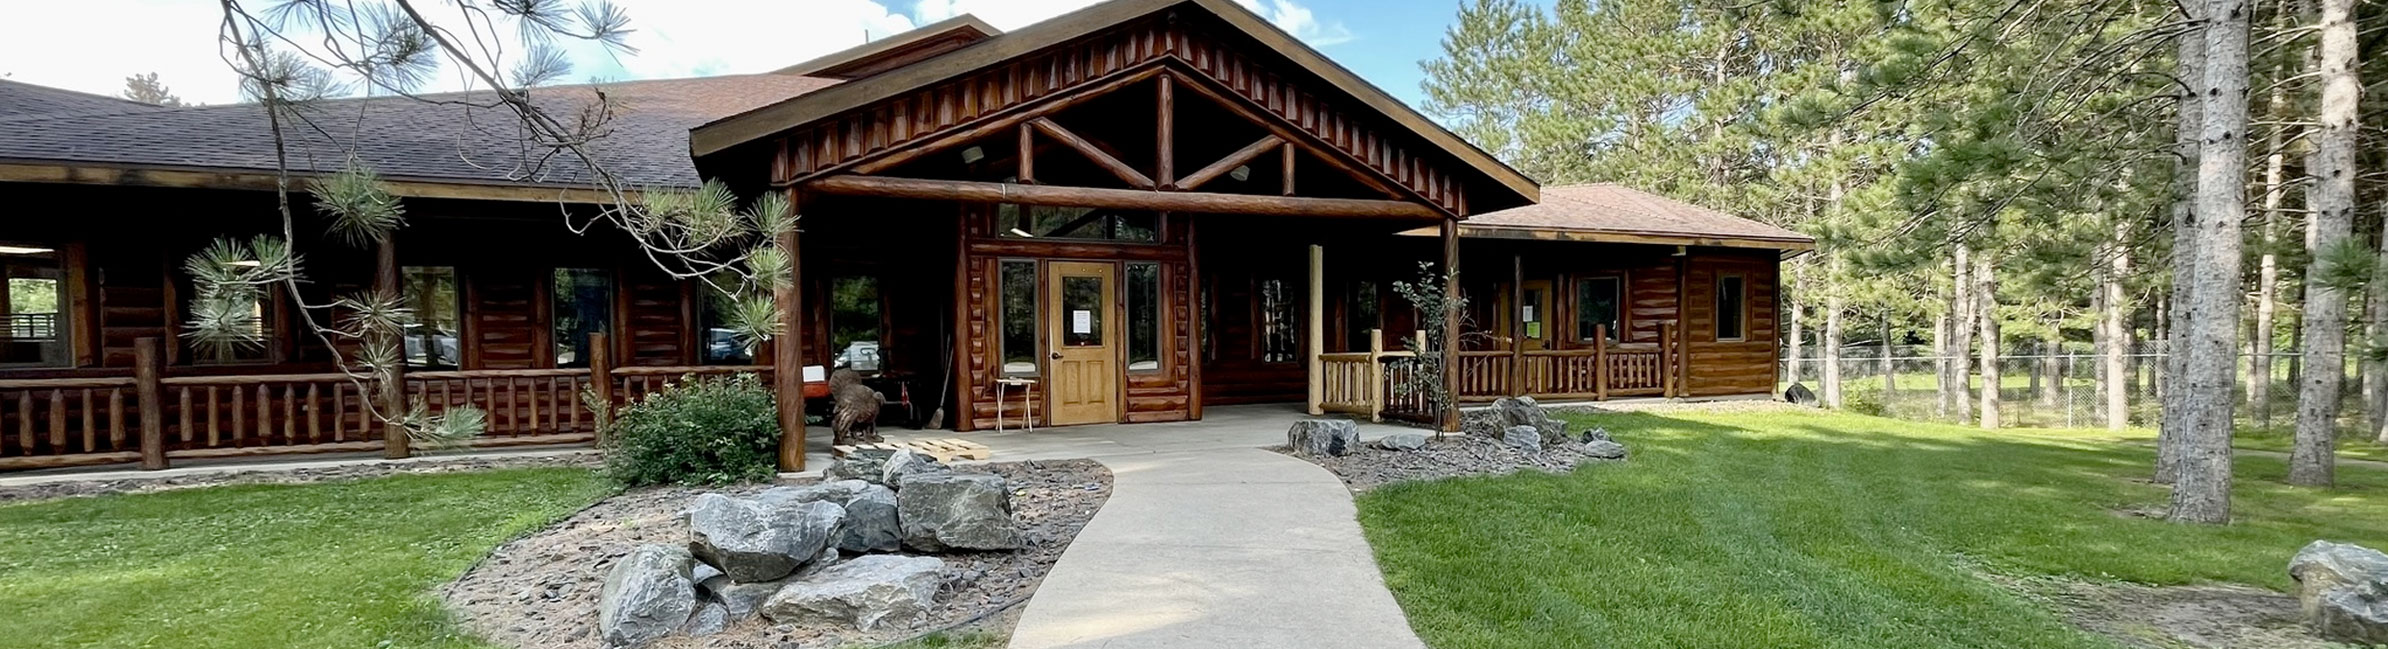 About the K-9 Country Lodge